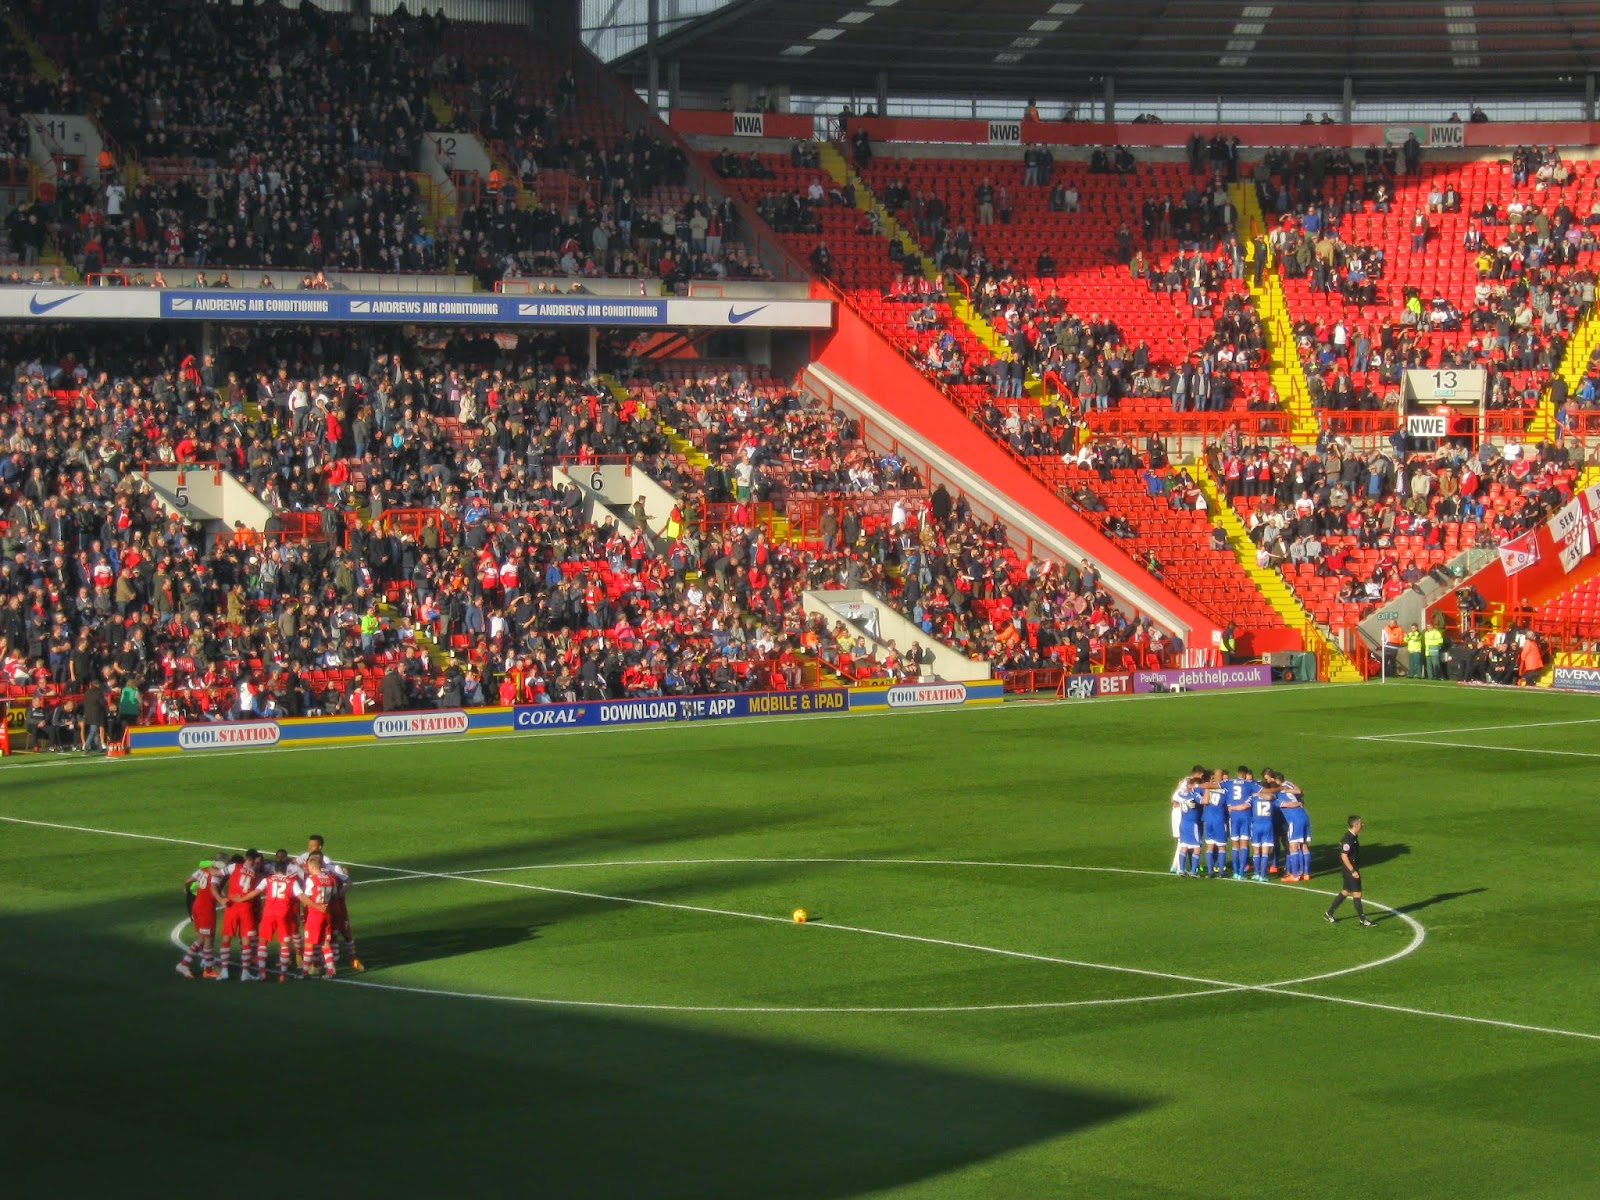 Many Games Have I Seen...: Charlton Athletic 0 v 1 Ipswich Town